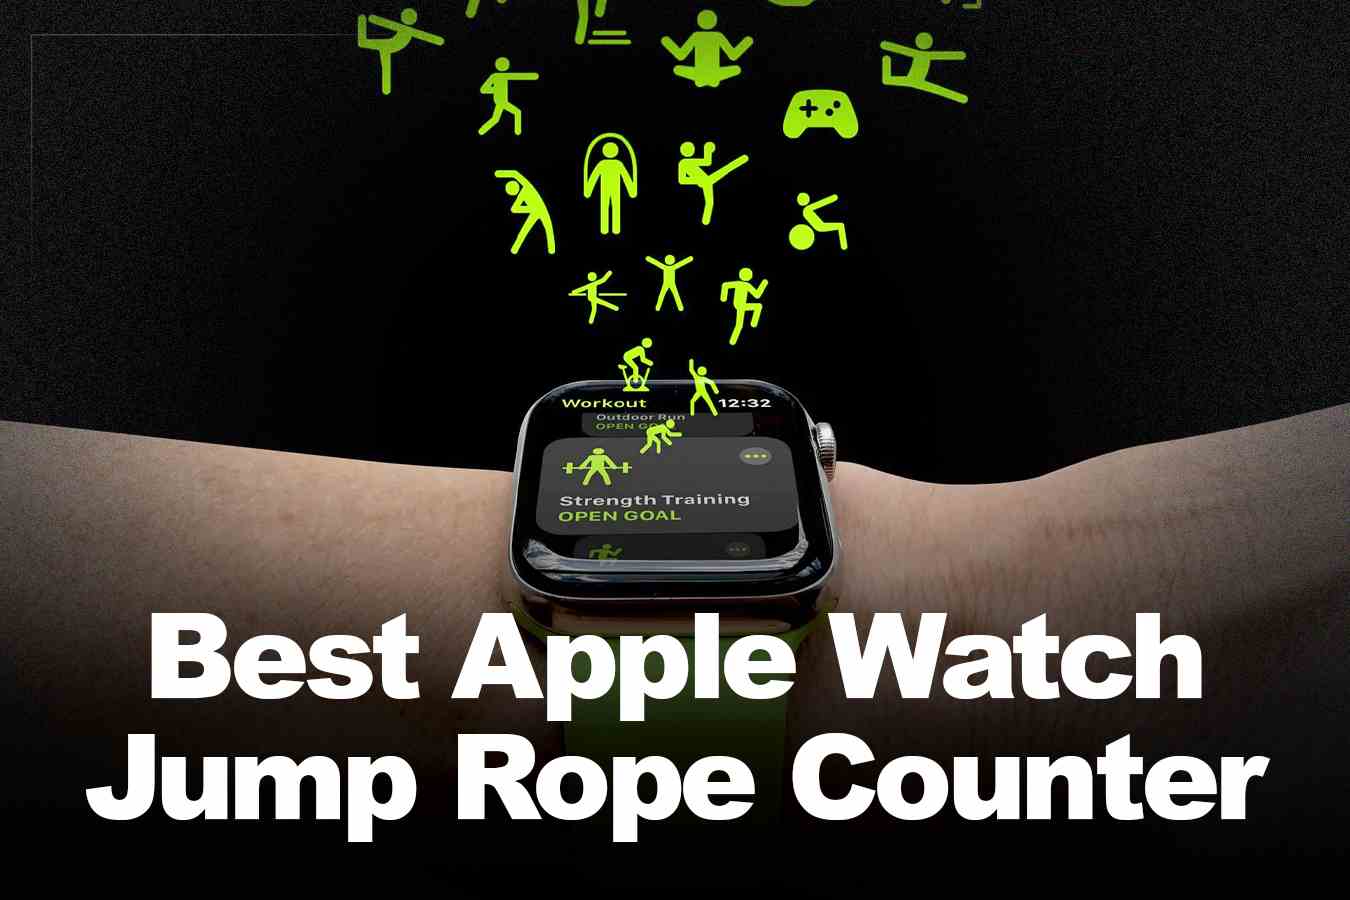 Best Apple Watch Jump Rope Counter